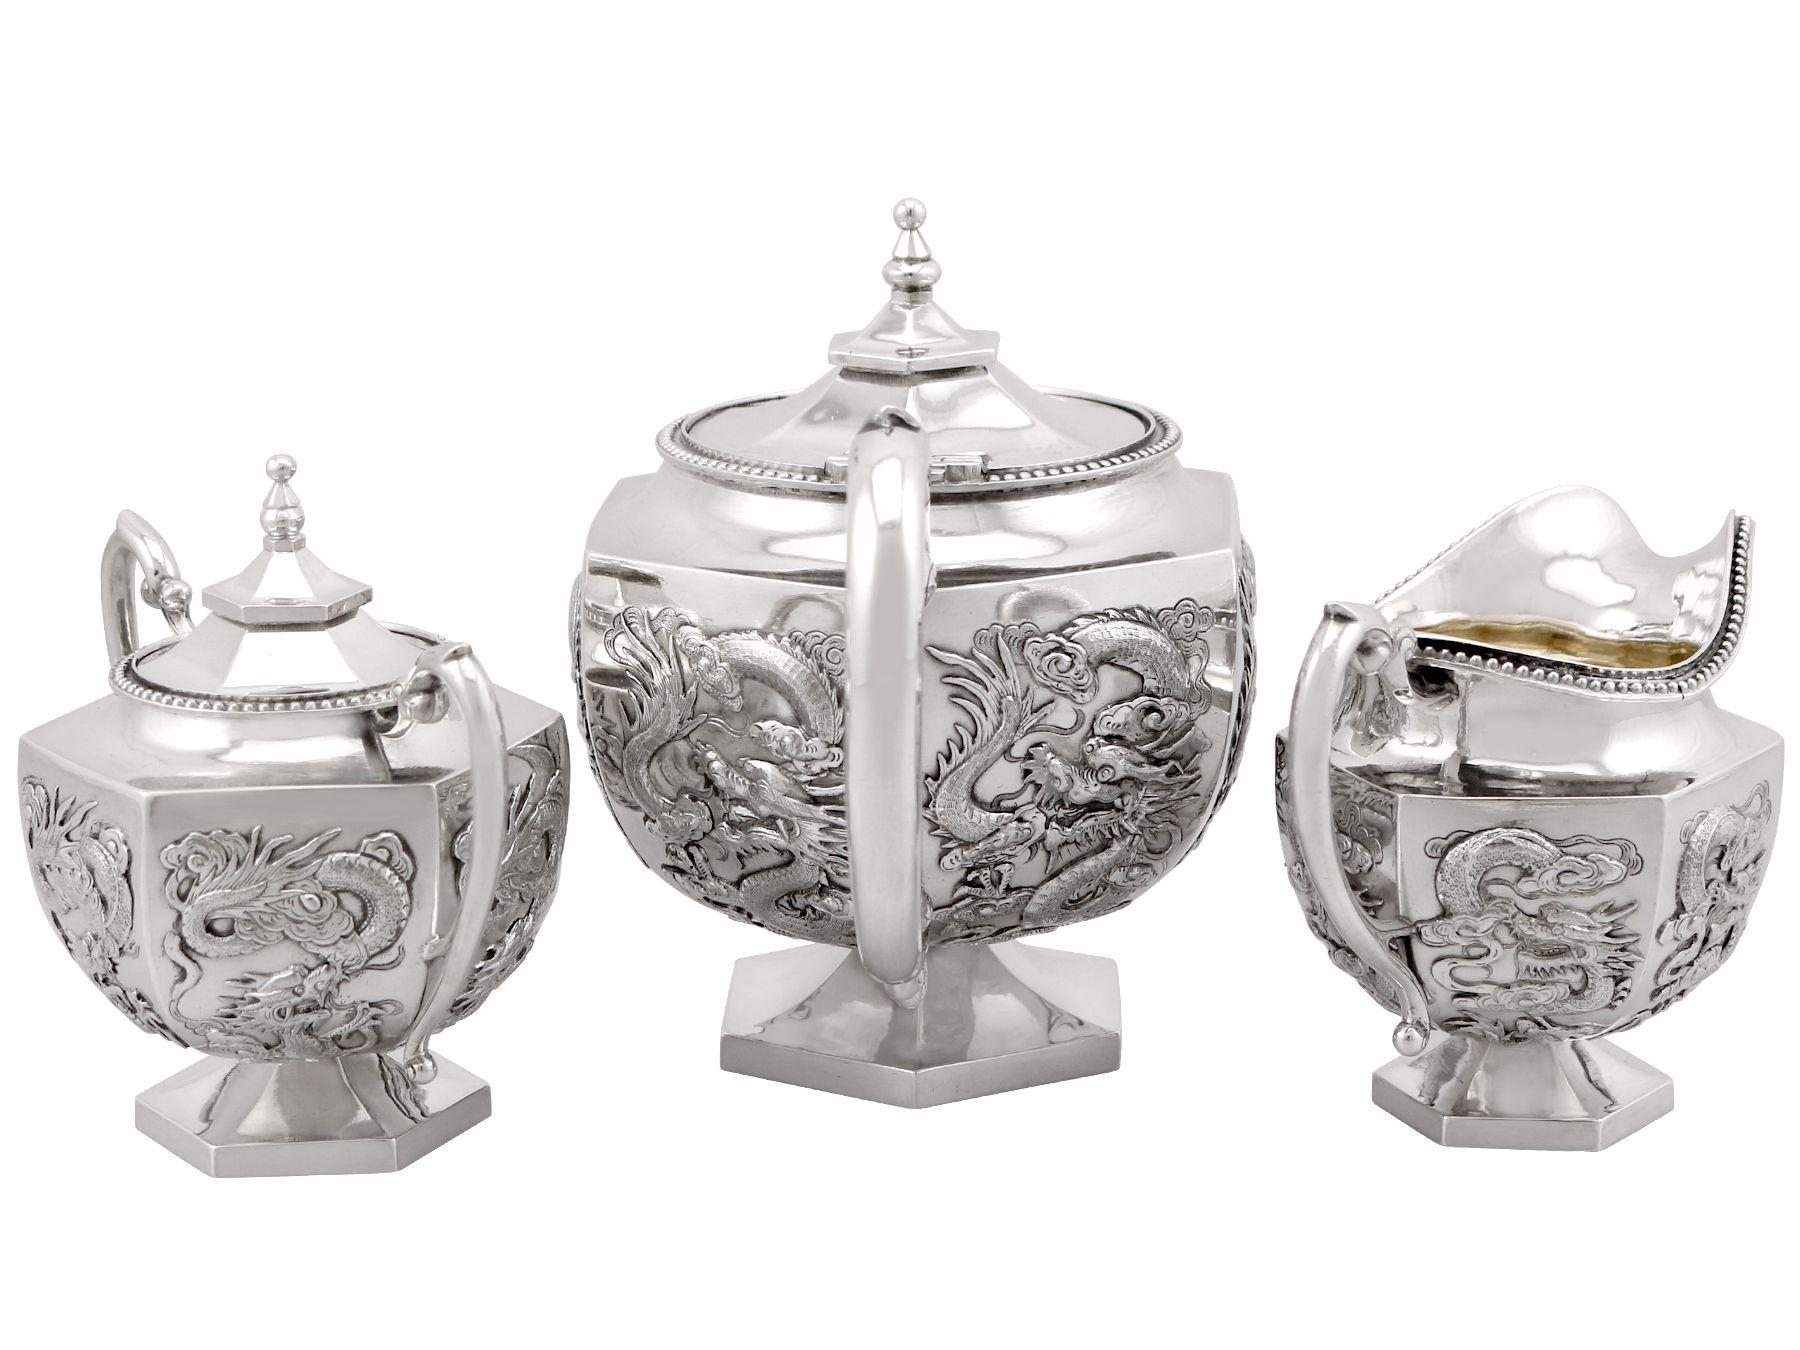 An exceptional, fine and impressive antique Chinese export silver three piece tea service; an addition to our diverse silver teaware collection.

This exceptional antique Chinese silver tea set/service consists of a teapot, cream jug and covered